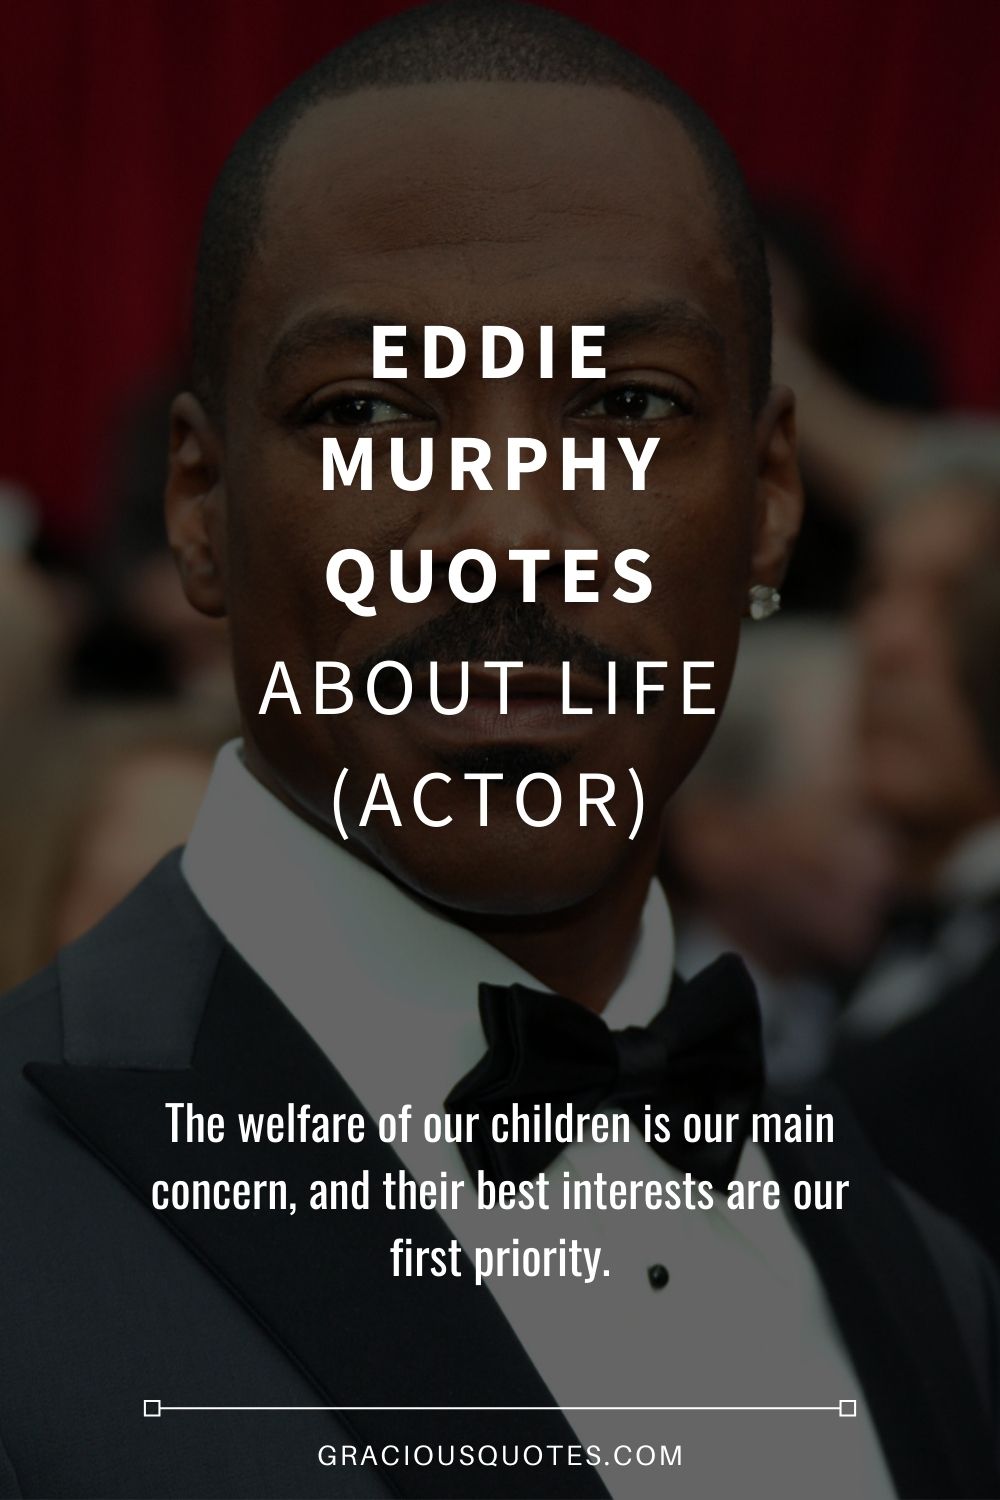 Eddie Murphy Quotes About Life (ACTOR) - Gracious Quotes